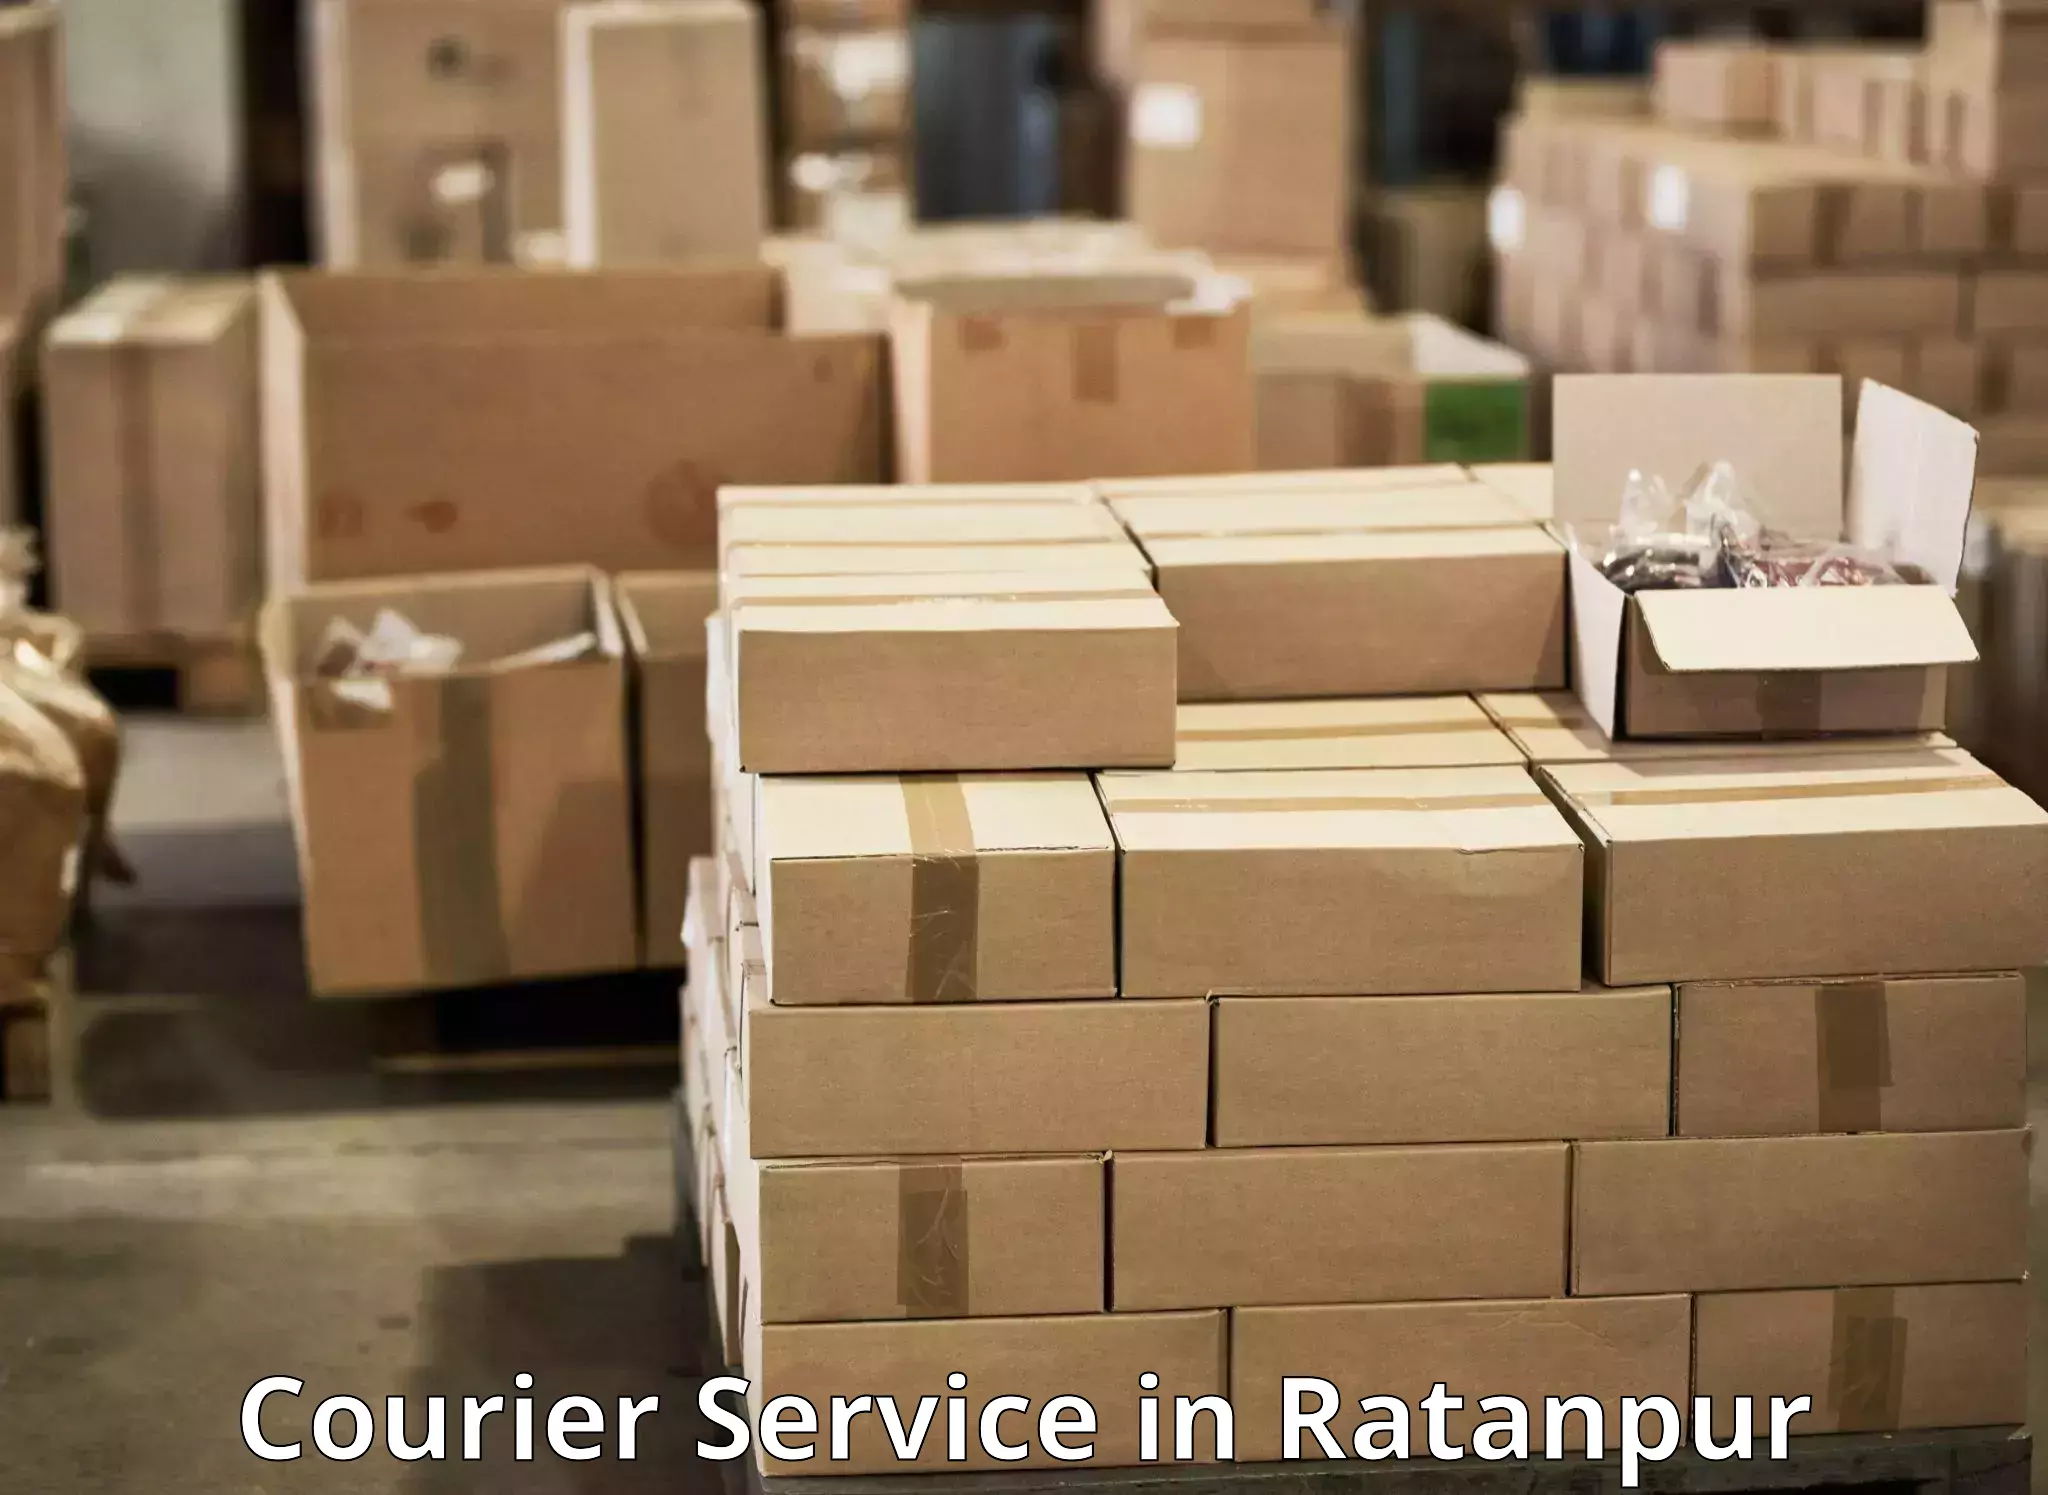 Global shipping networks in Ratanpur